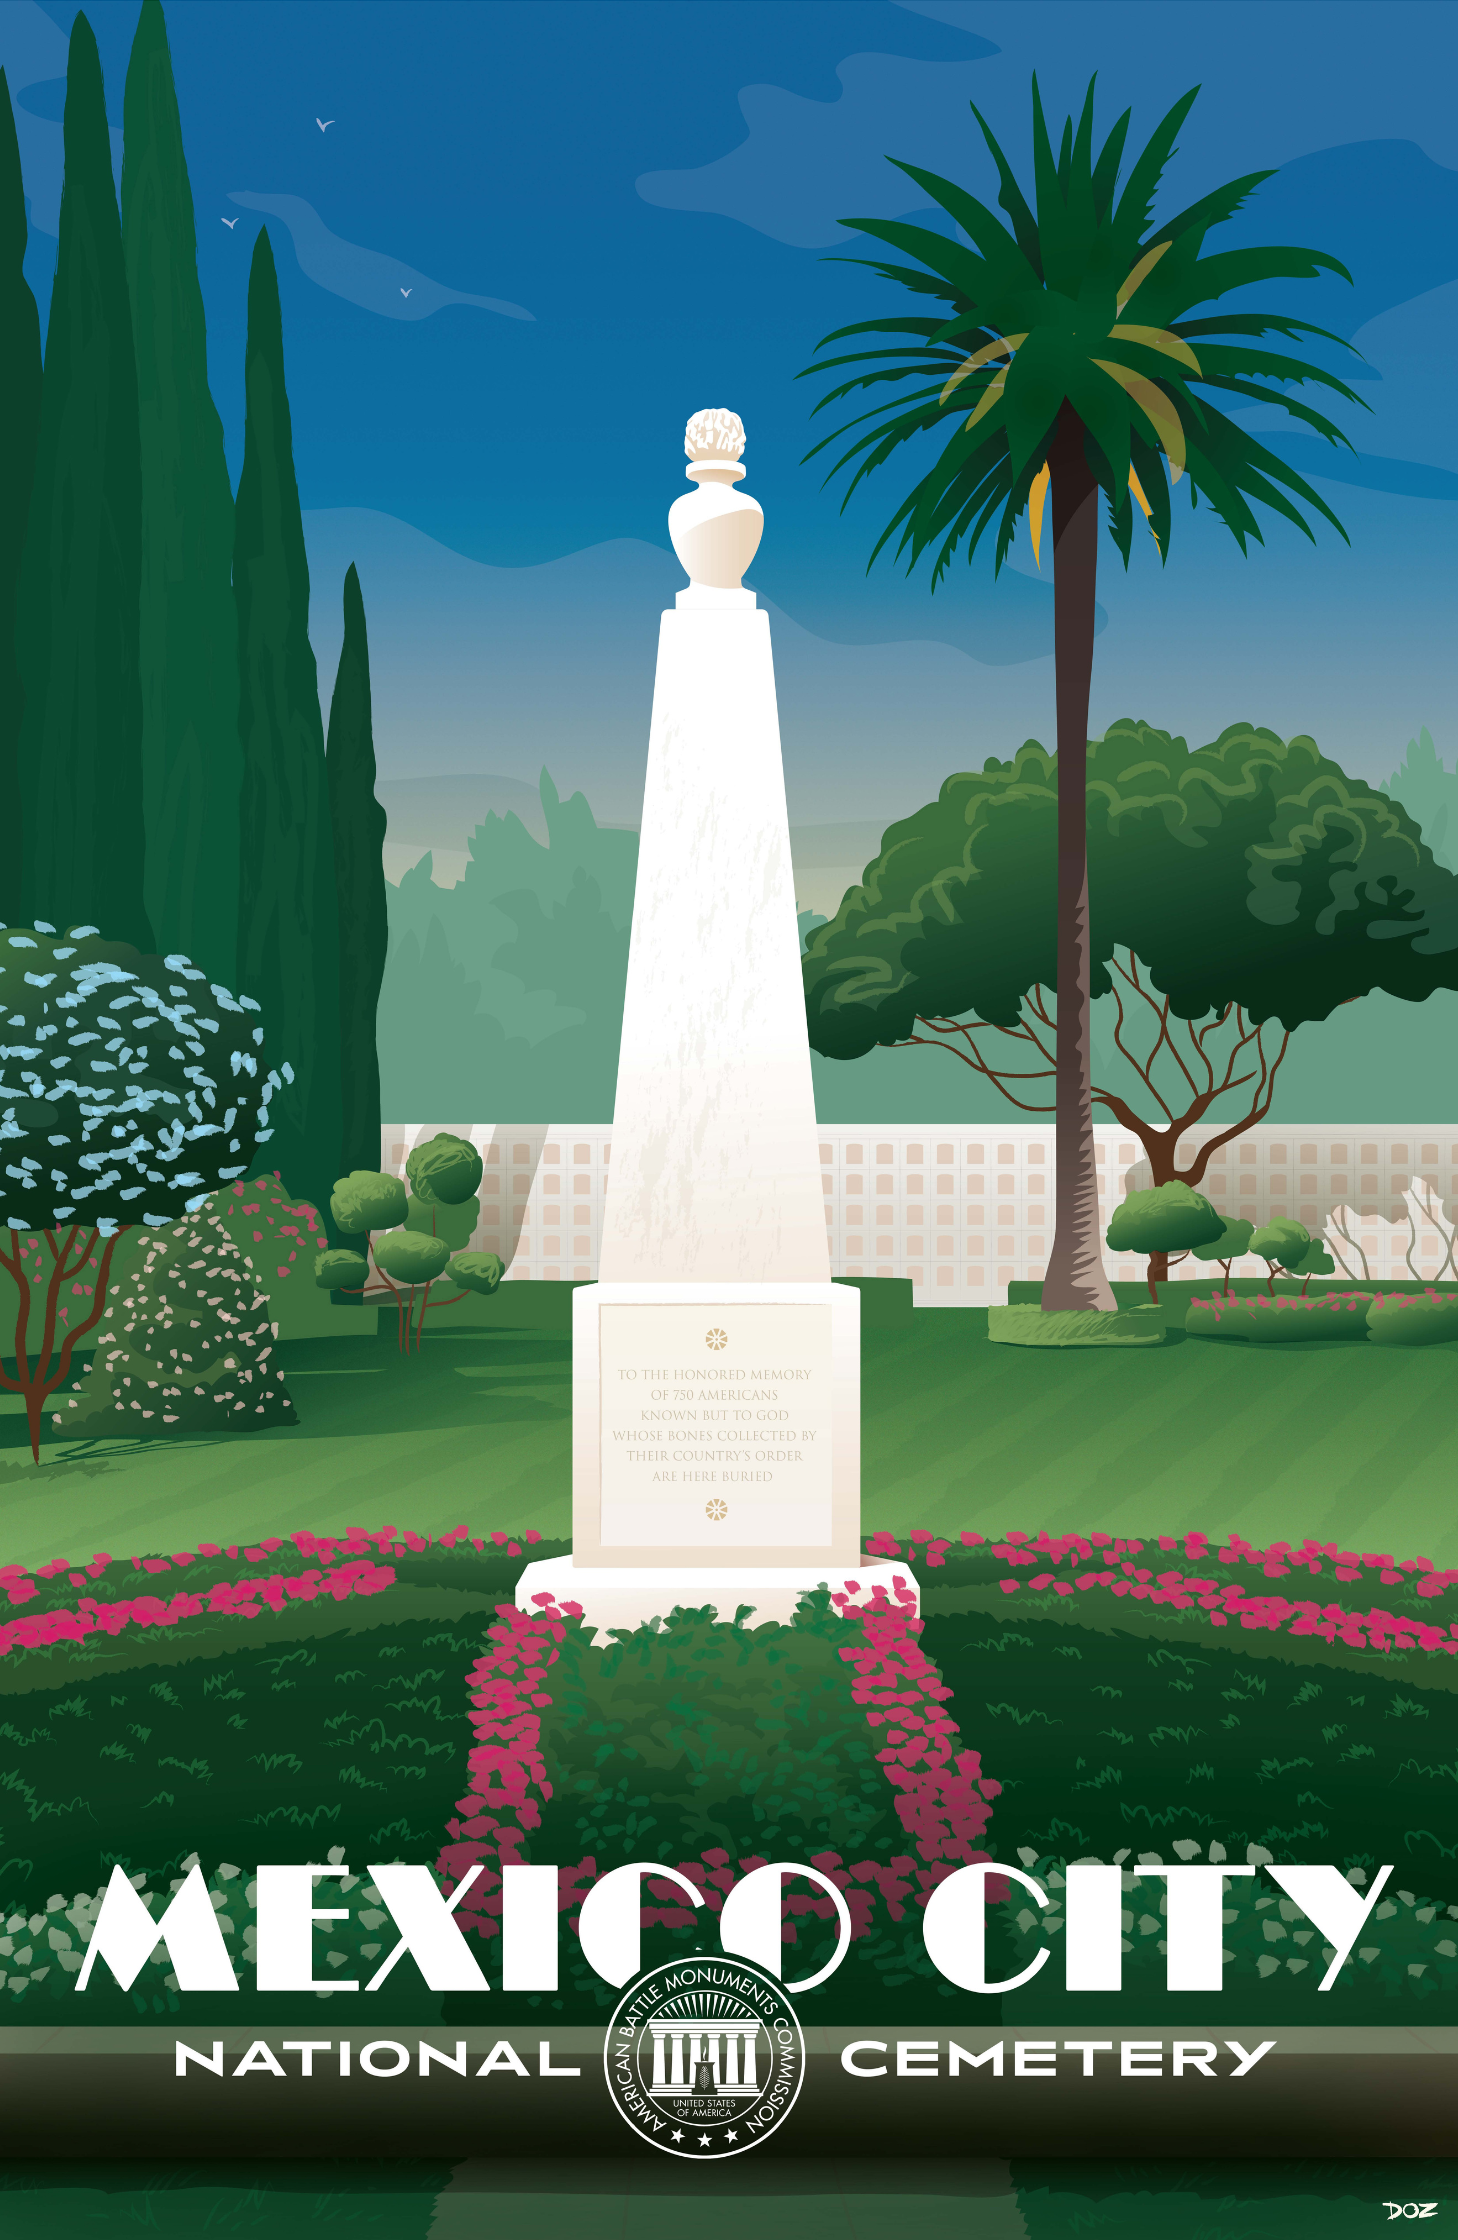 Vintage poster of Mexico City National Cemetery